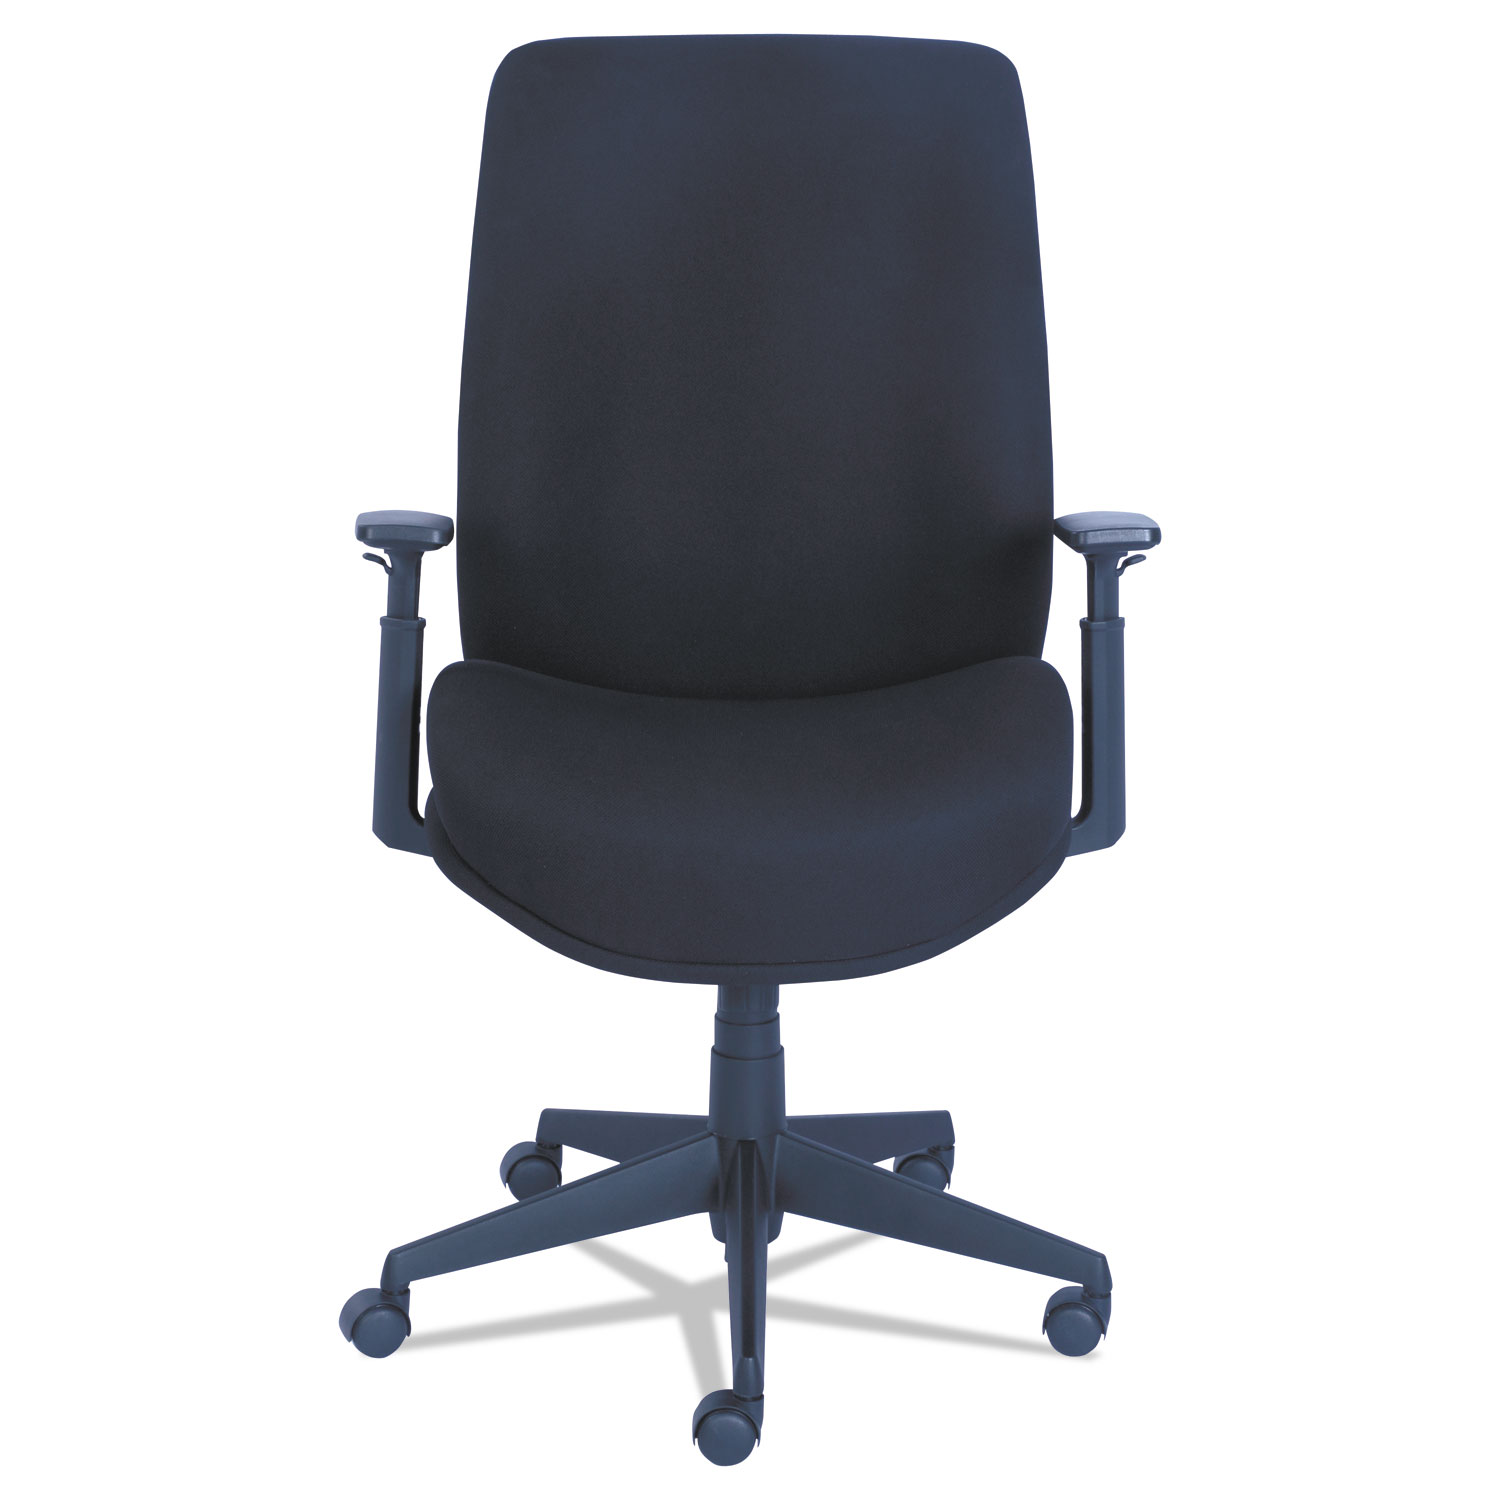 Baldwyn Series Mid Back Task Chair, Supports up to 275 lbs., Black Seat/Black Back, Black Base